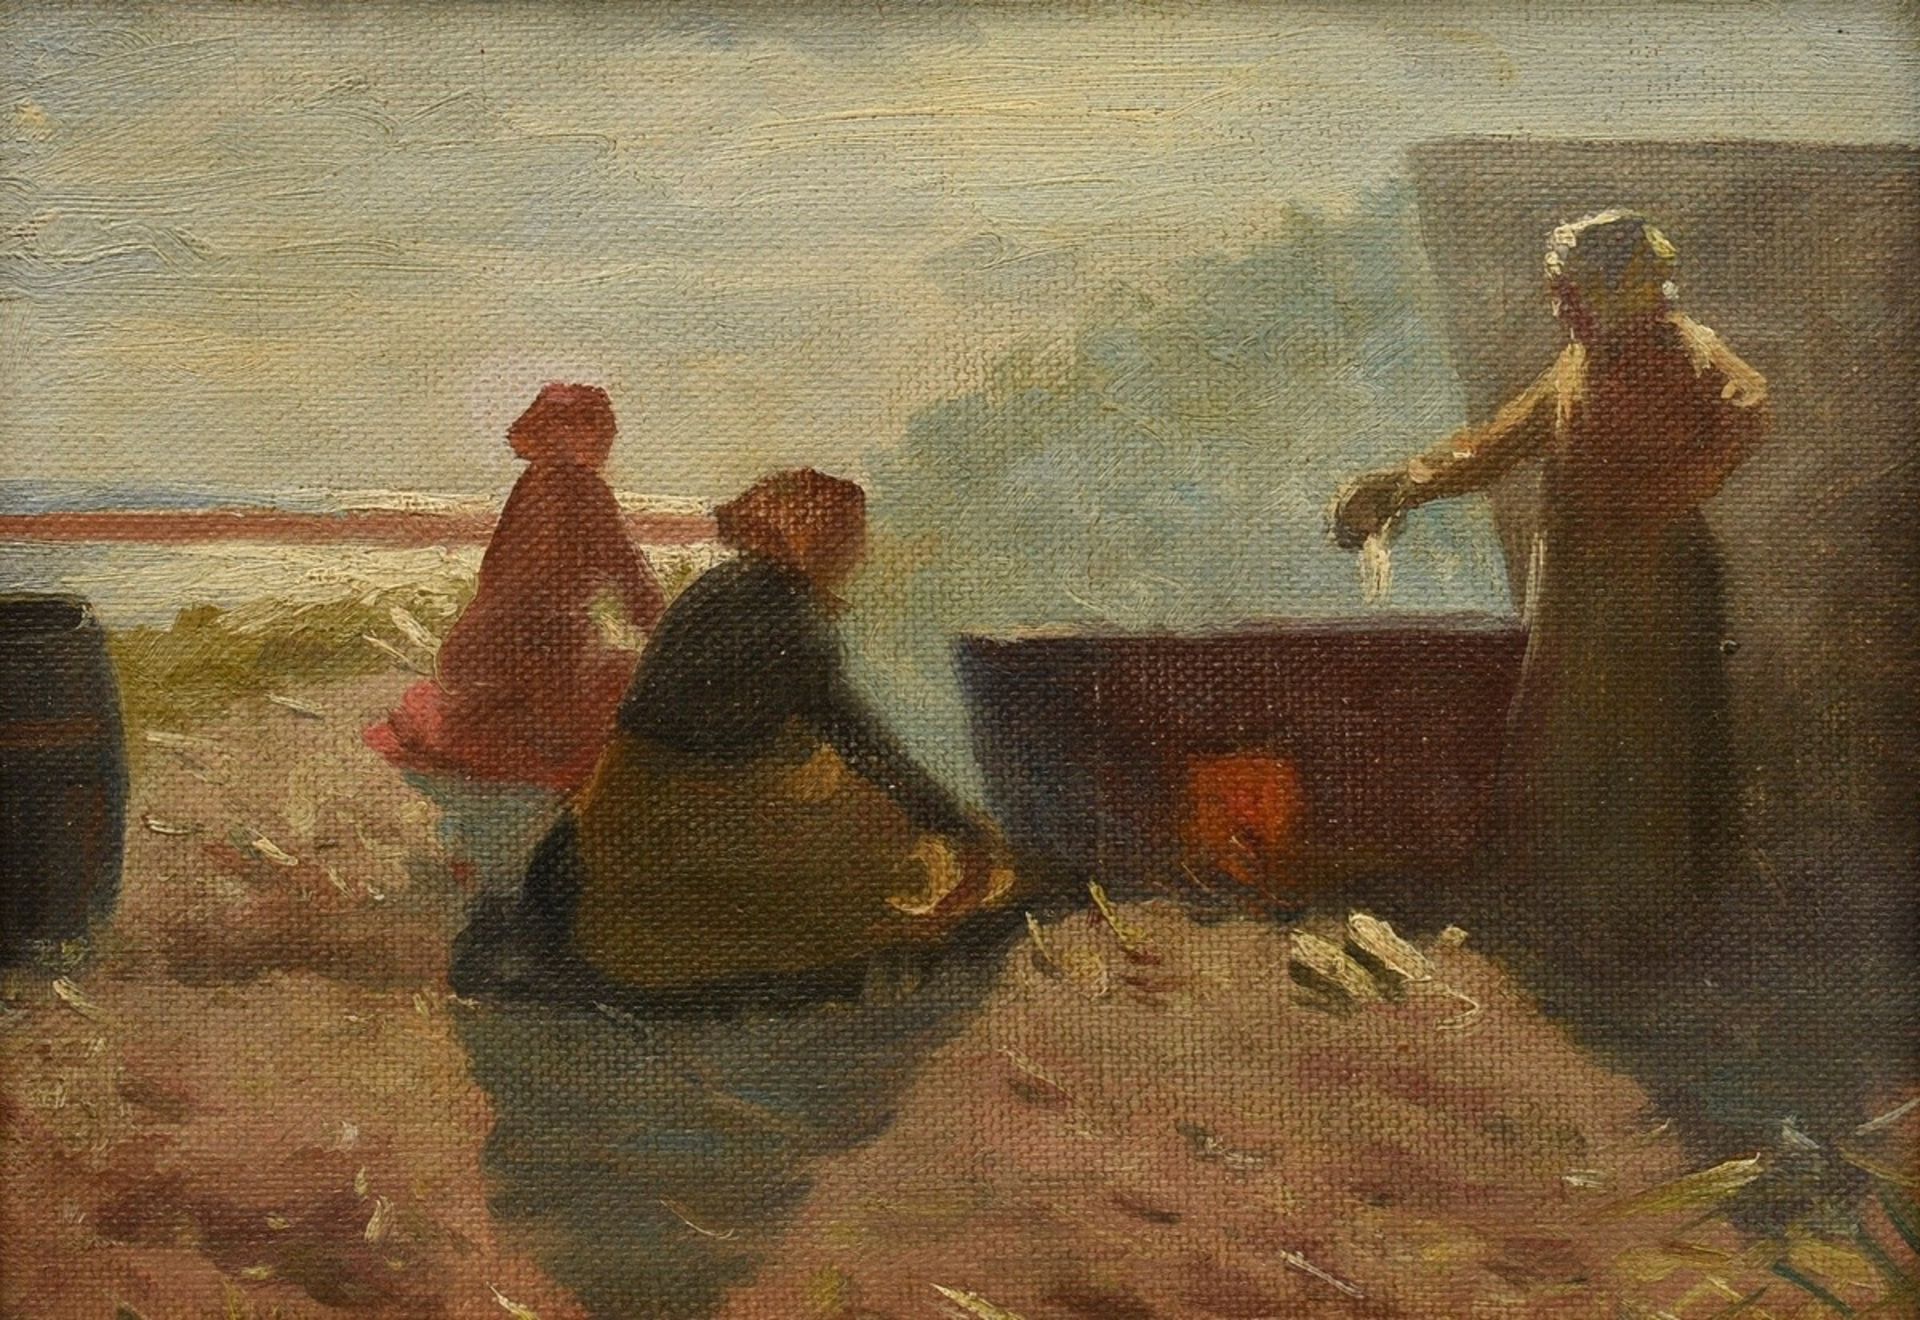 Tuxen, Laurits (1853-1927) attr. "Cooking with wood at Harboøre" (Trenkogning af Harboøre), oil/can